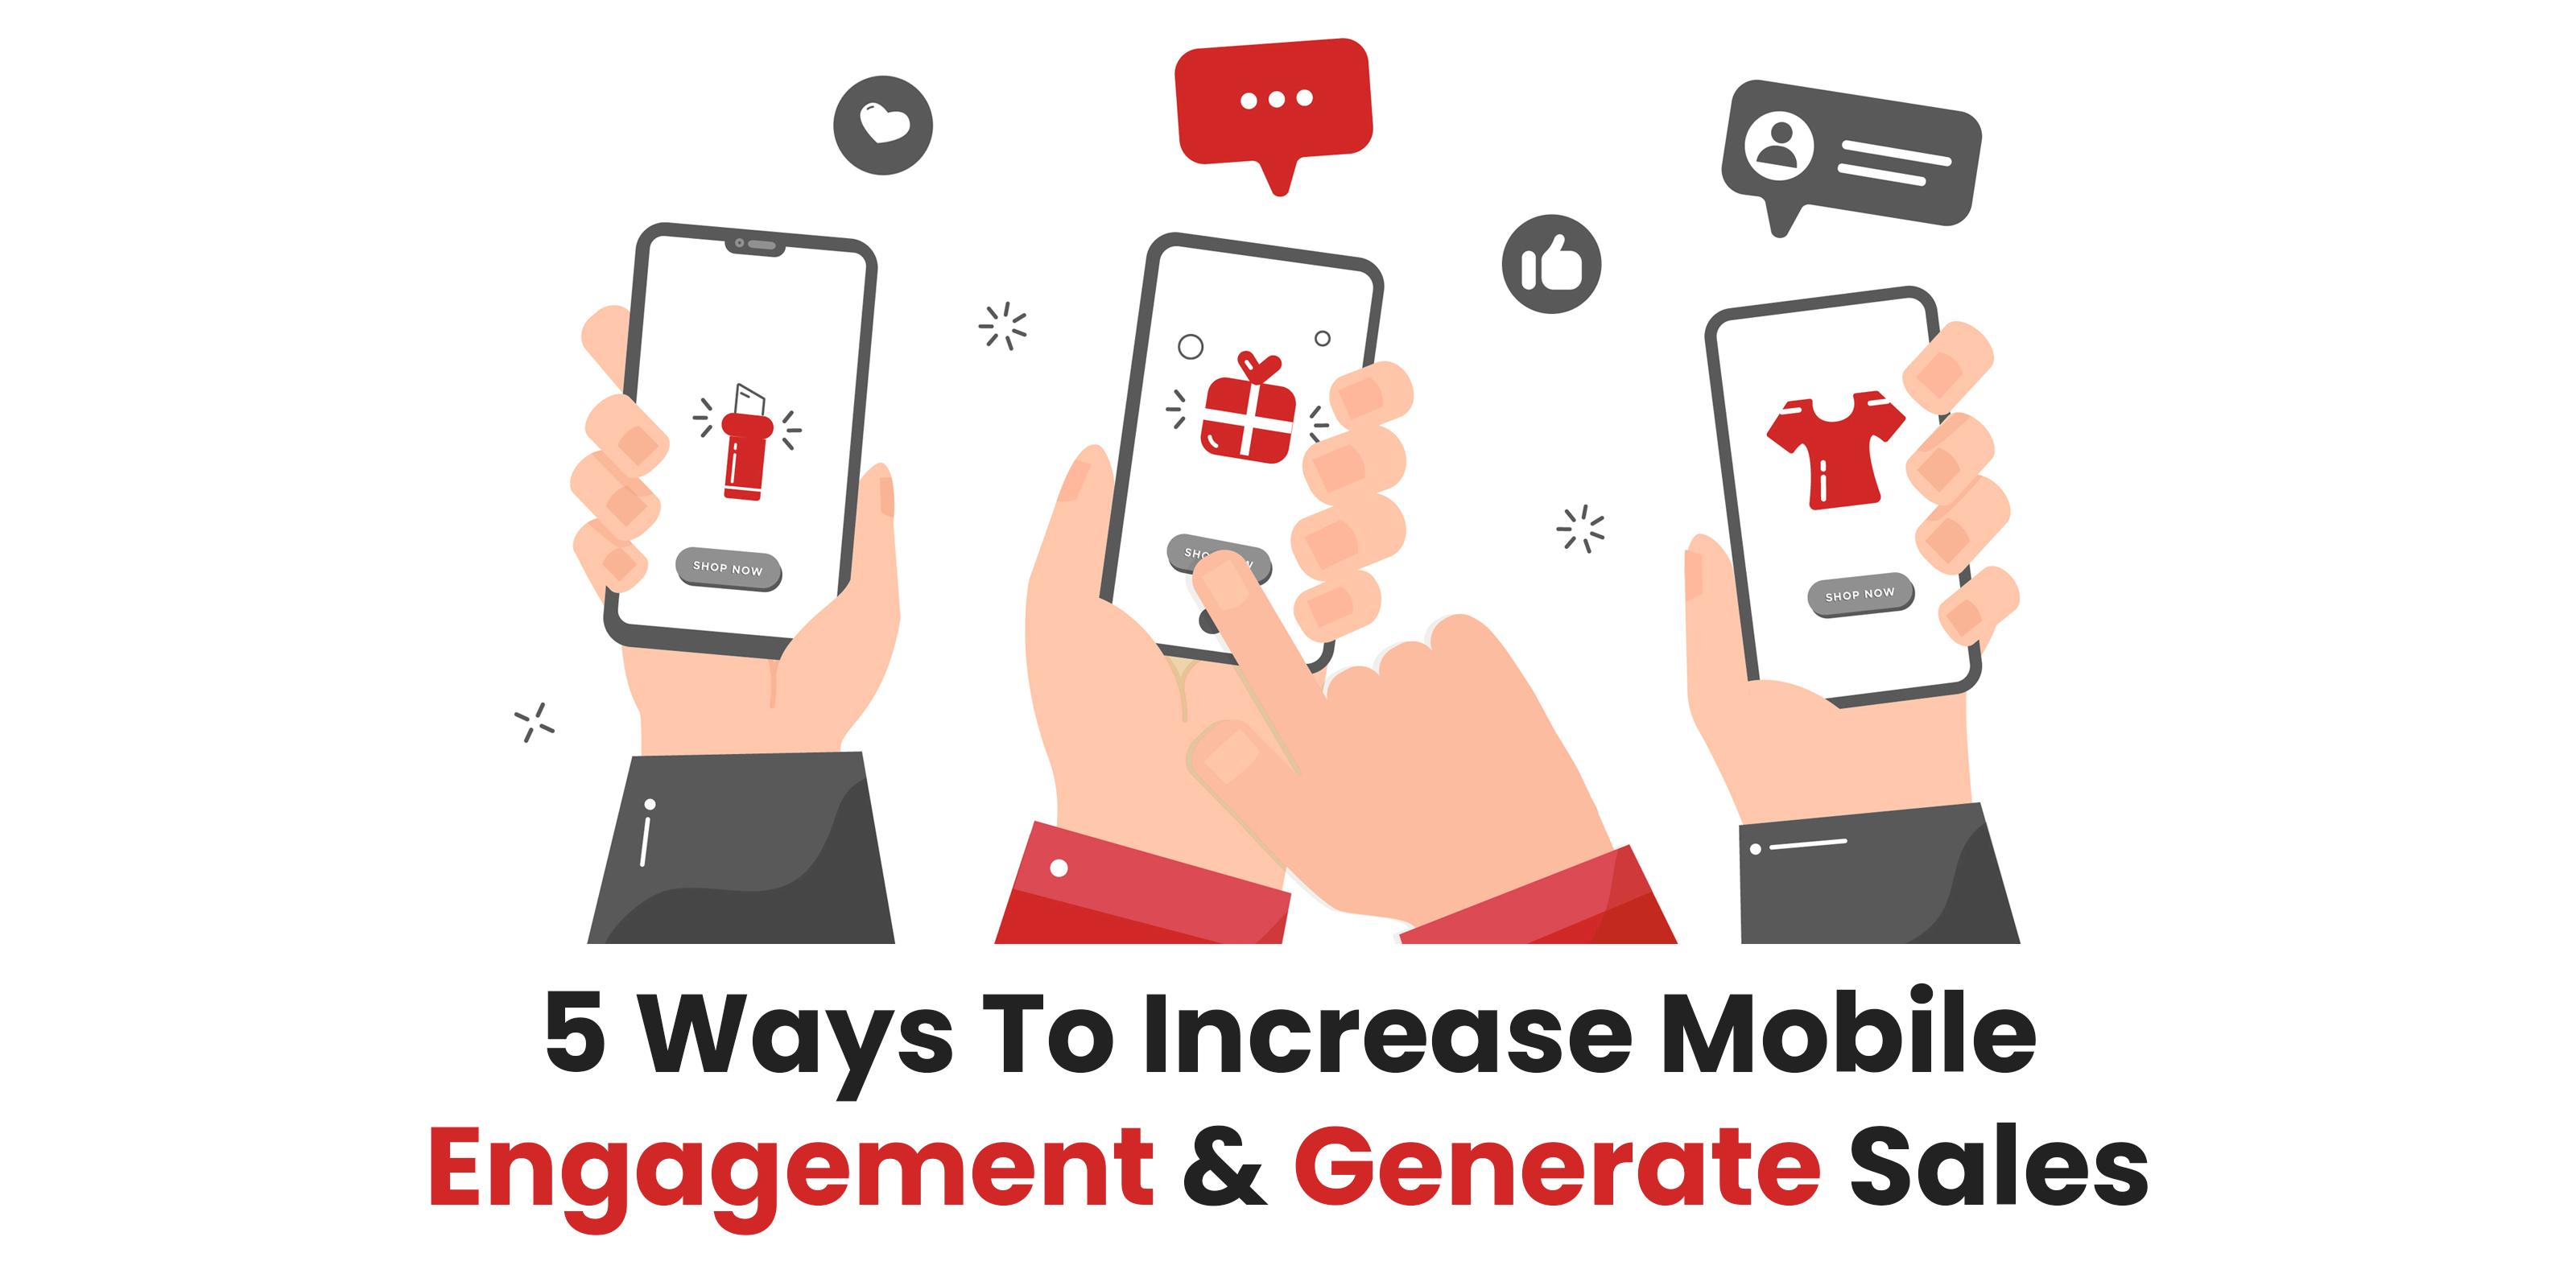 Increase mobile engagement